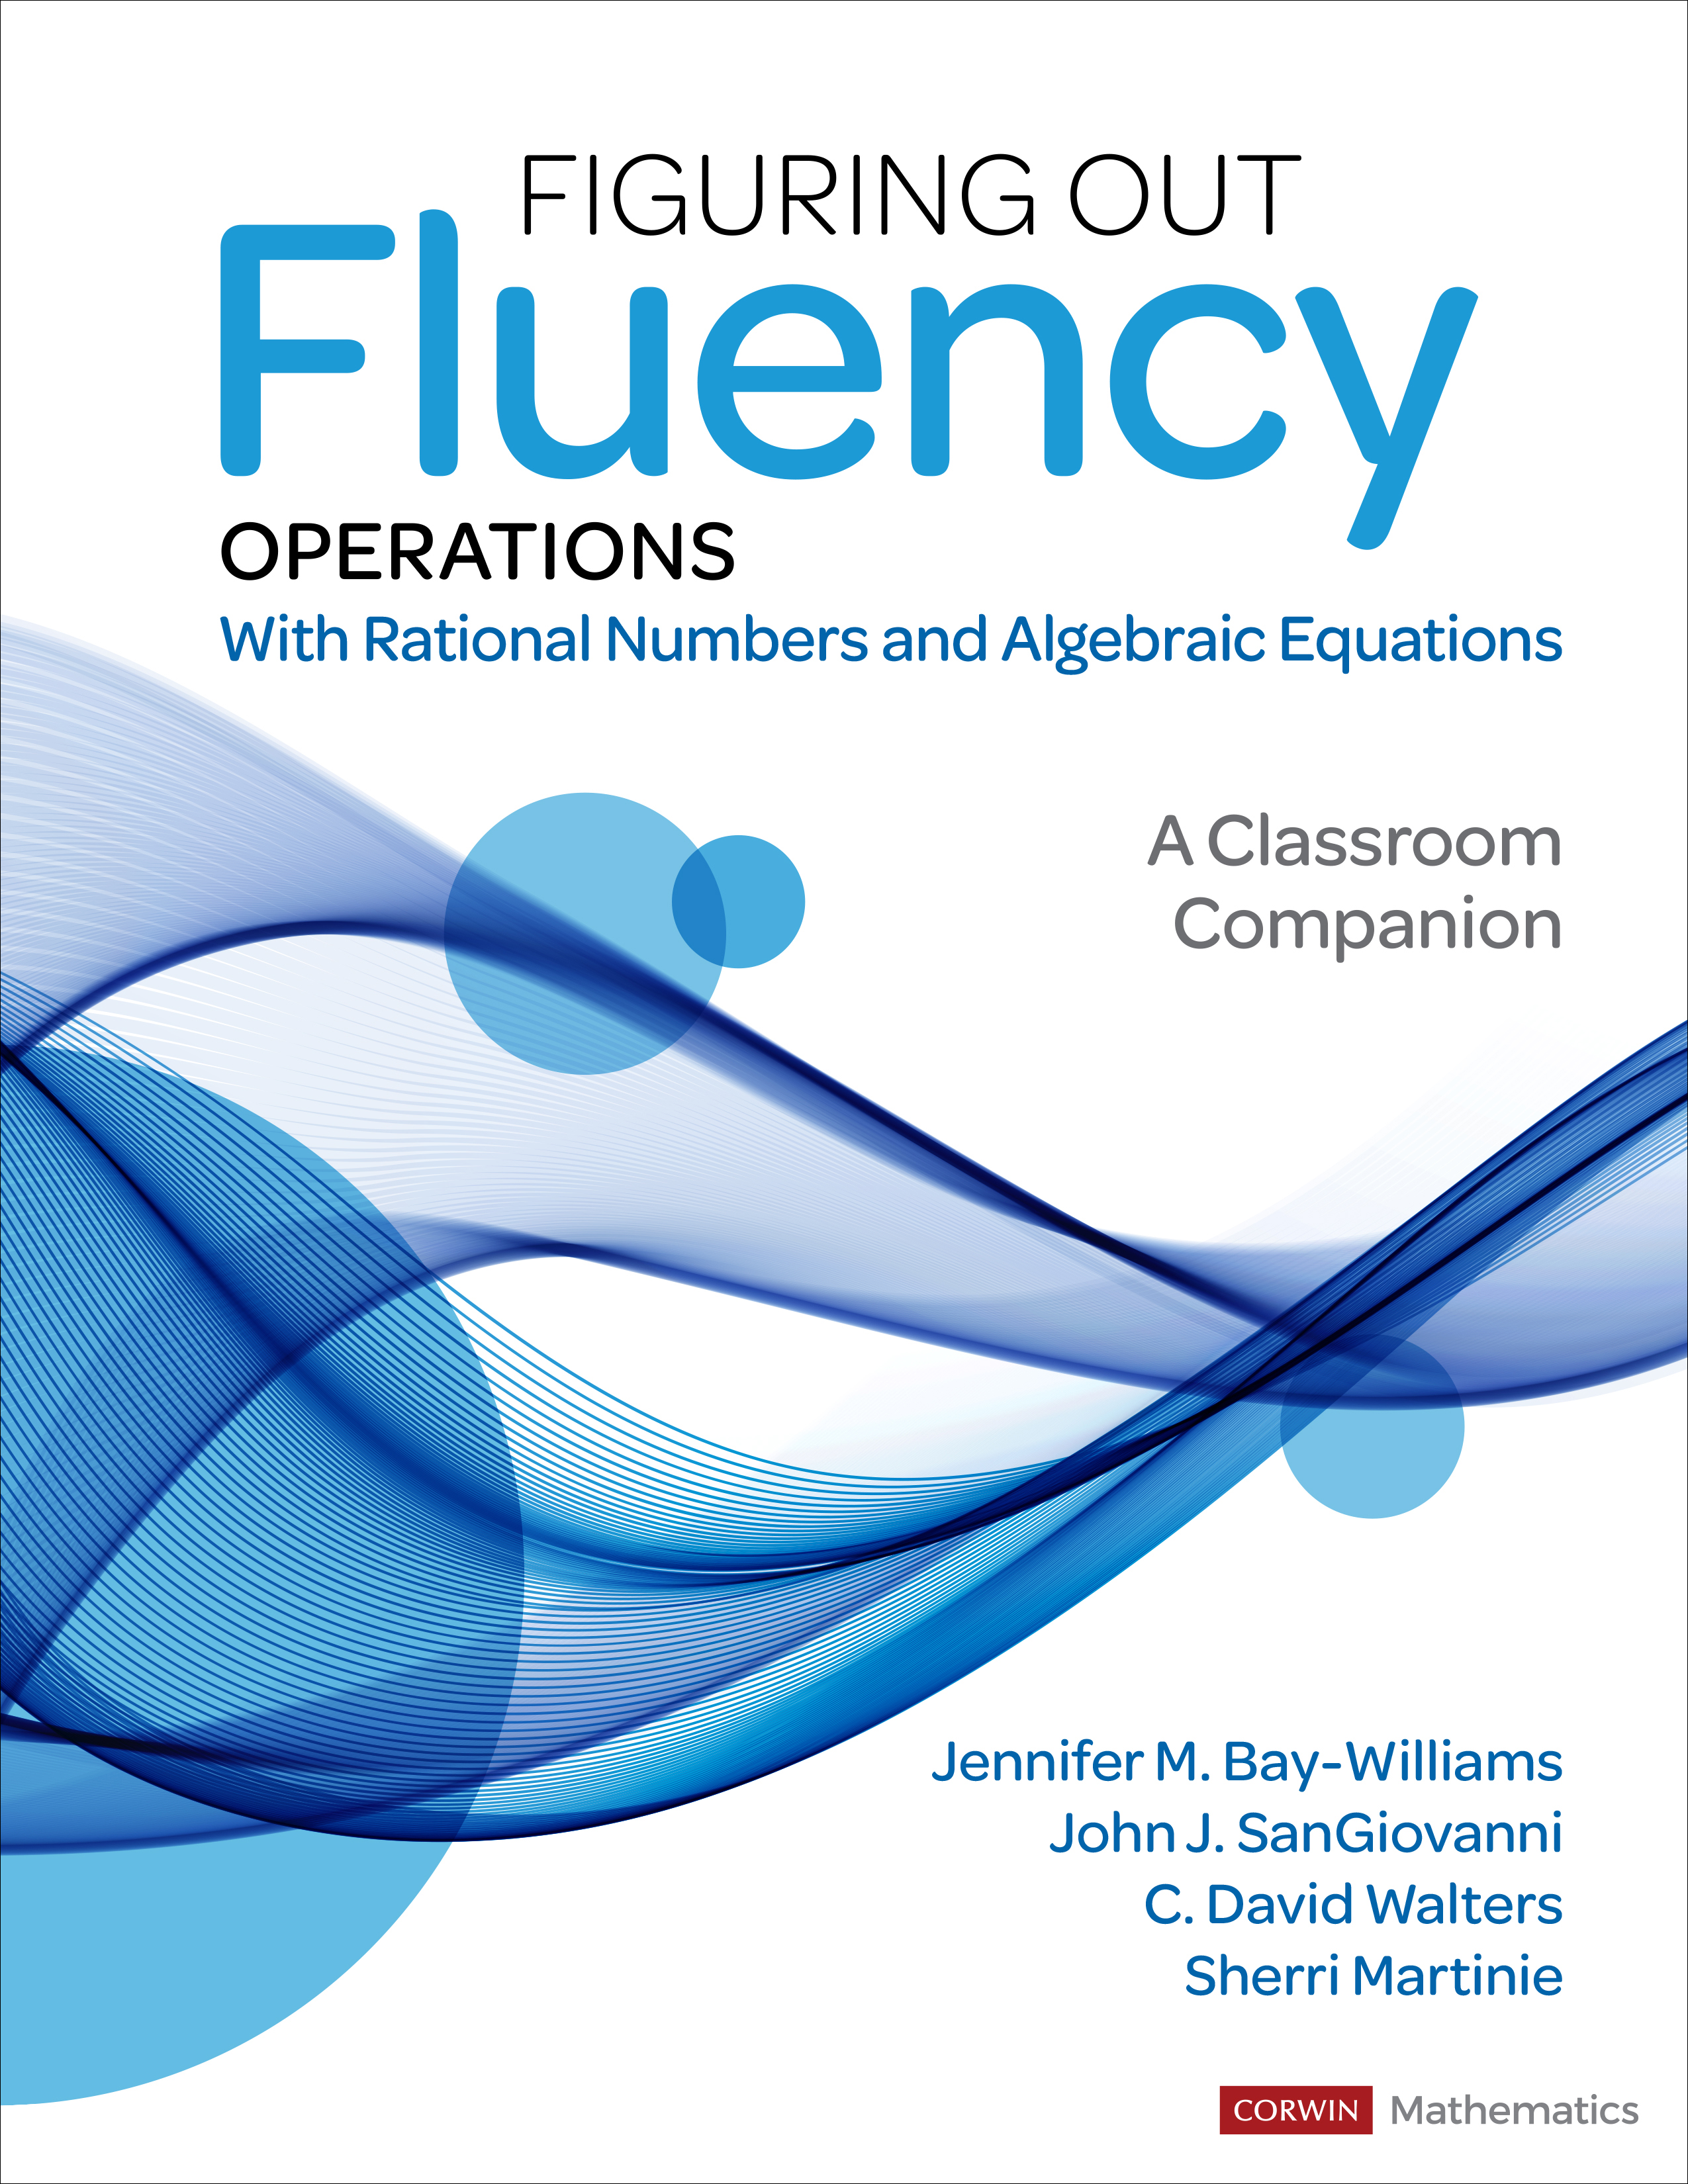 Figuring Out Fluency - Operations With Rational Numbers and Algebraic Equations